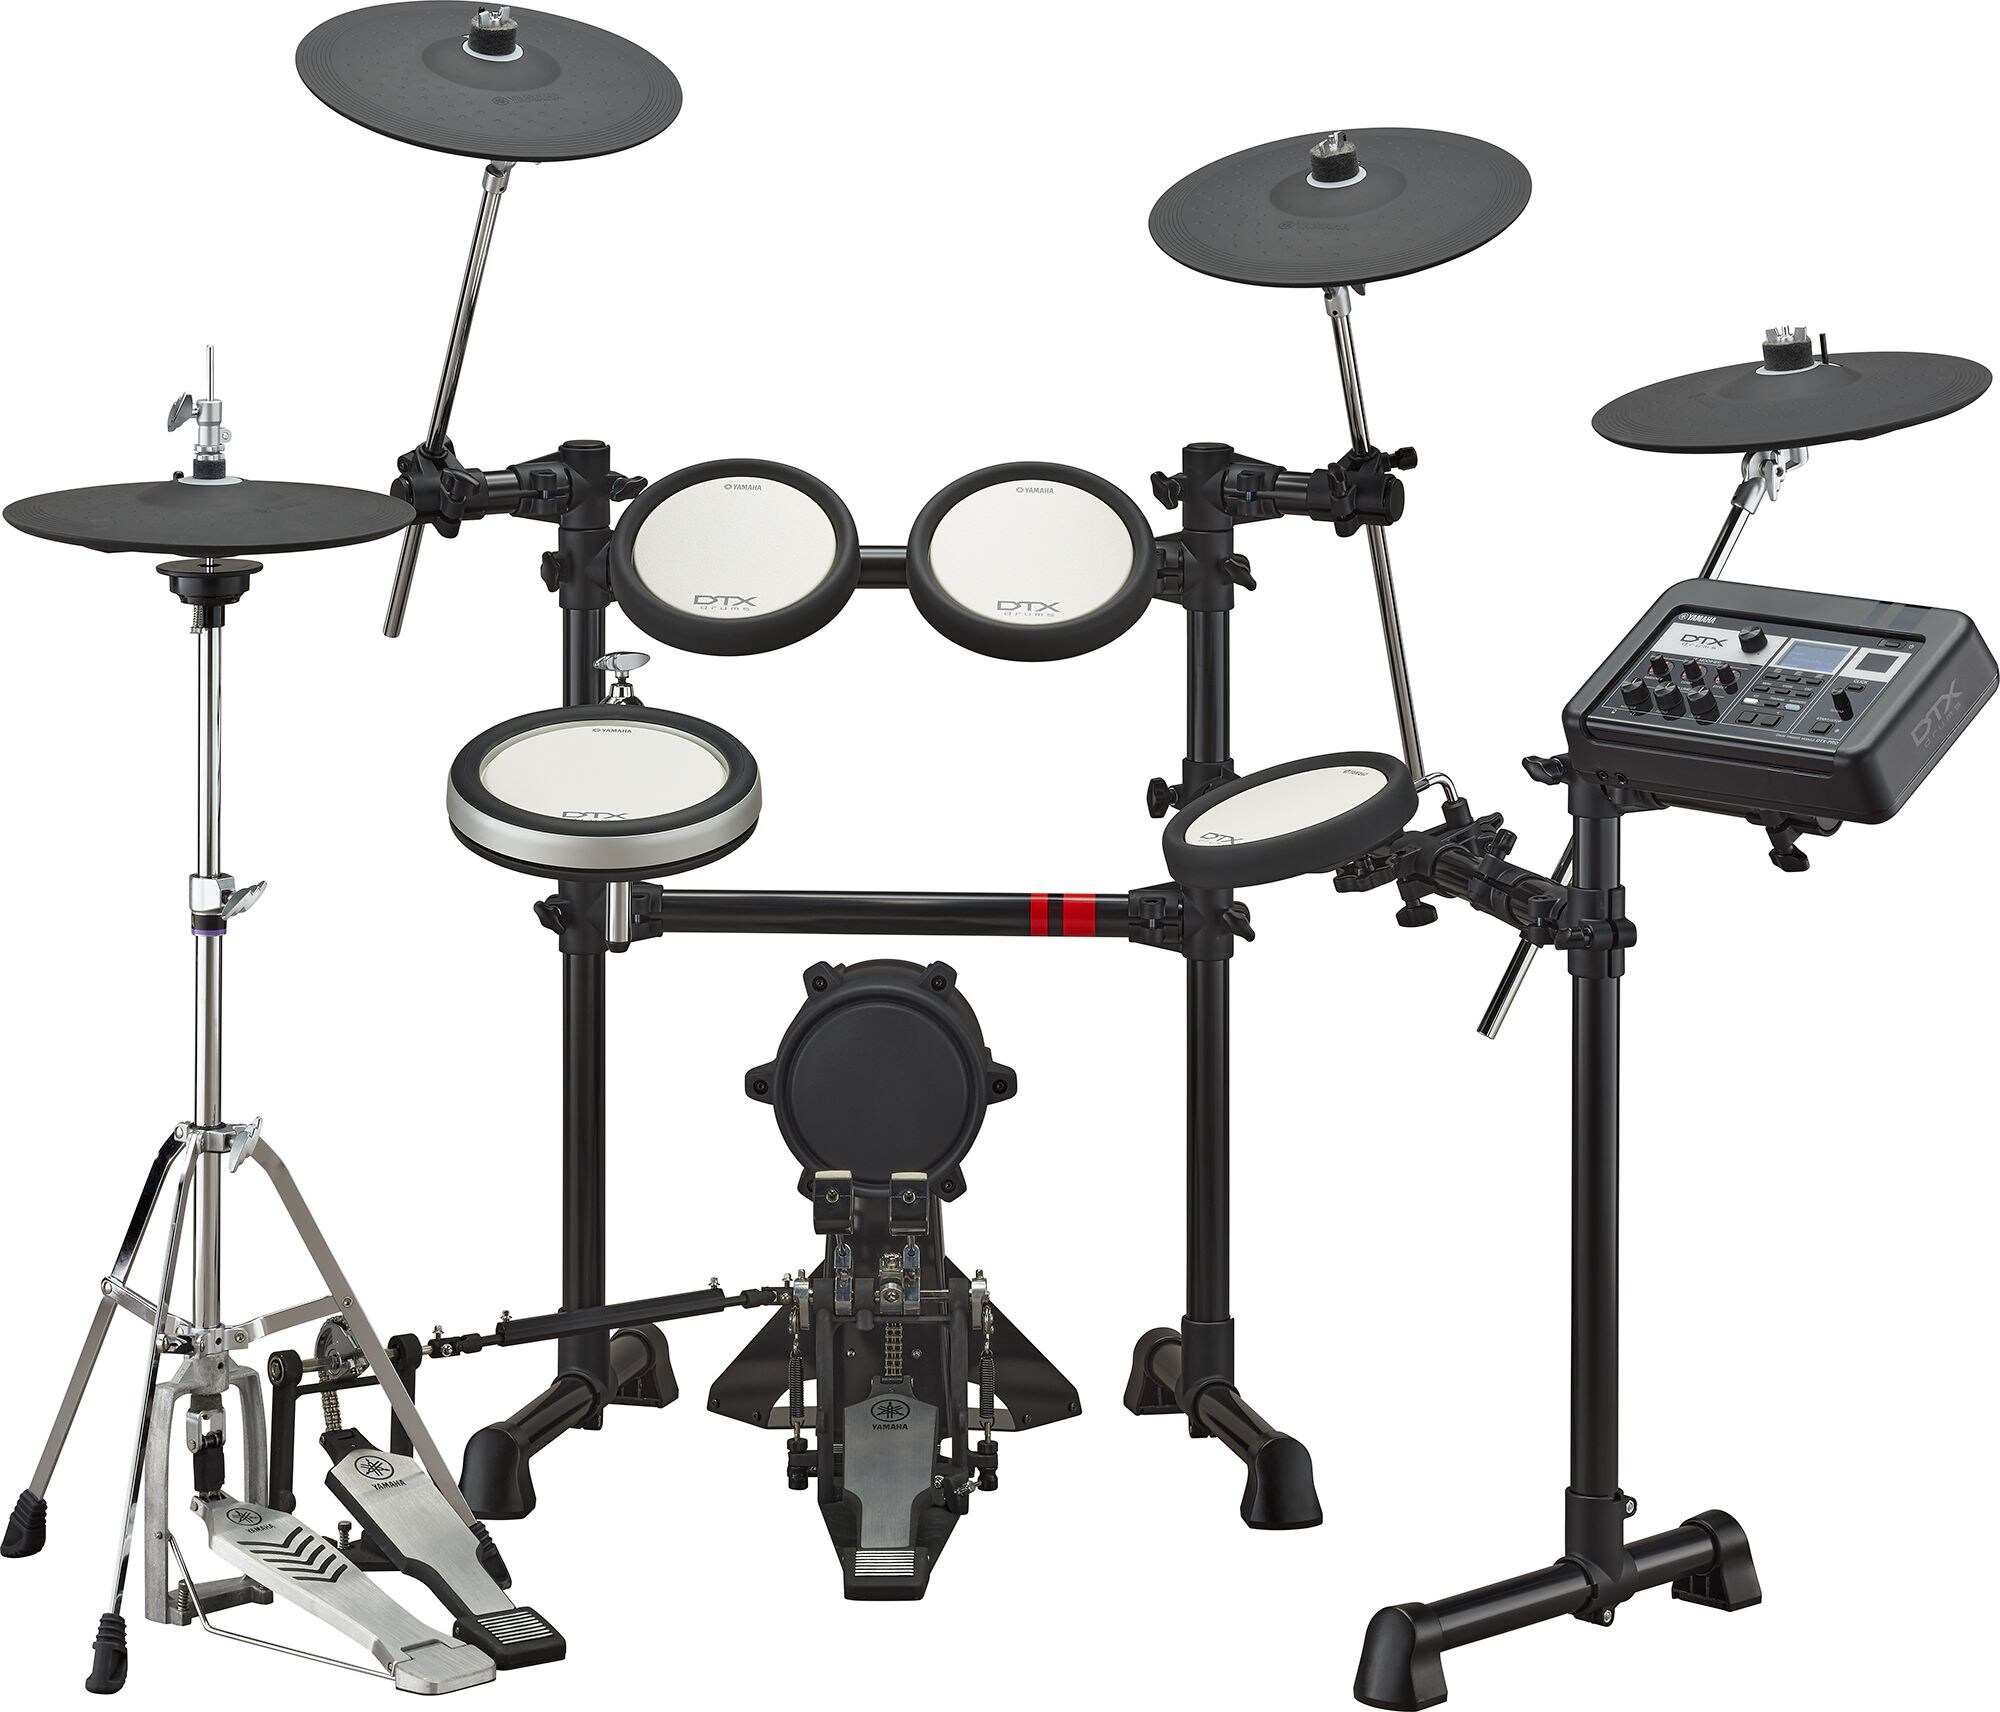 DTX6 Series - Products - / - Latin - Musical Middle Drums America Electronic Electronic / / / / Yamaha Drum - Drums CIS Kits Products Instruments - Asia East - Oceania Africa 